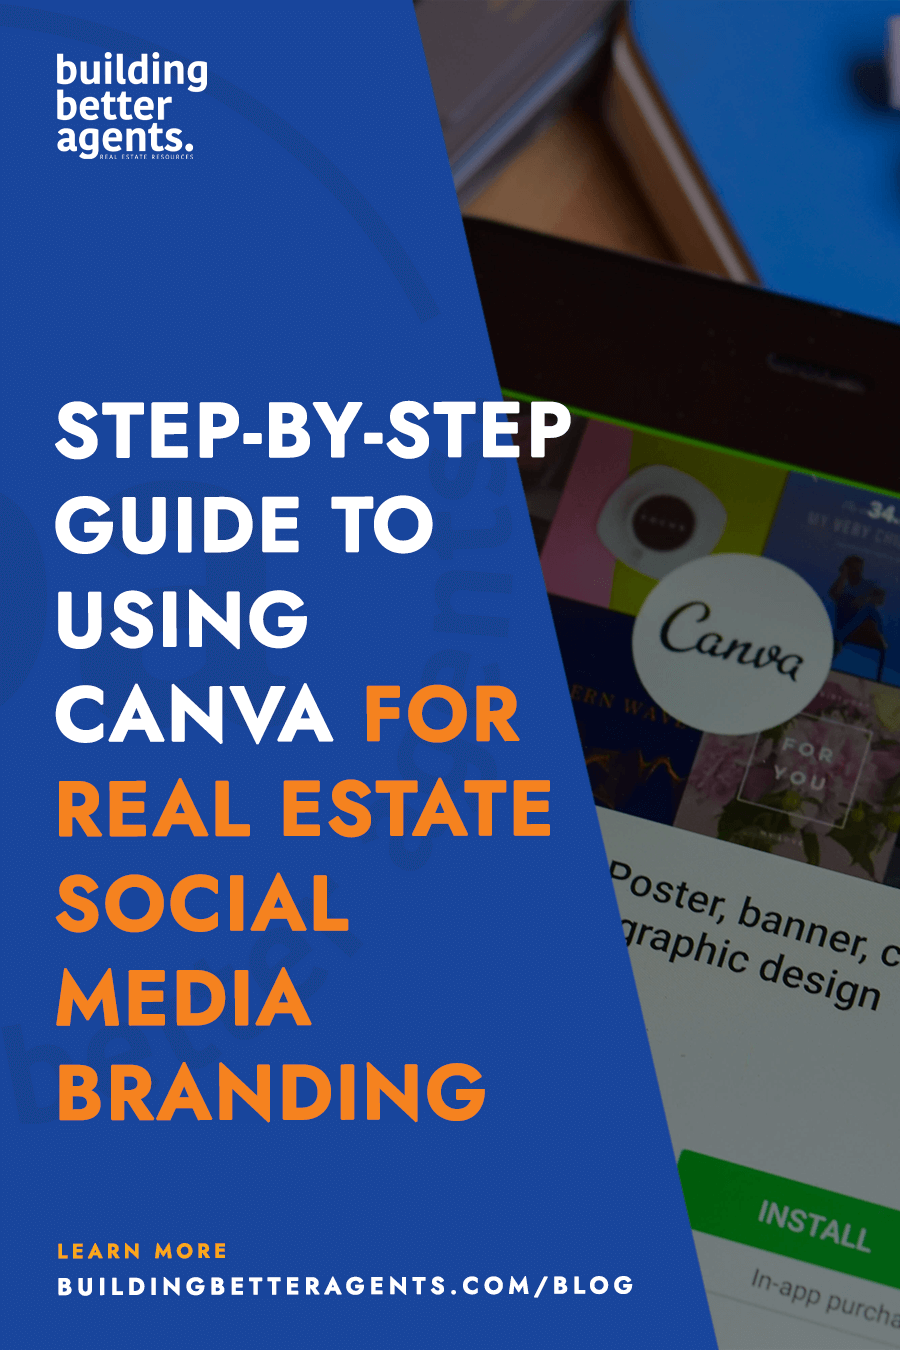 A Step-by-Step Guide to using Canva for Real Estate Social Media Branding